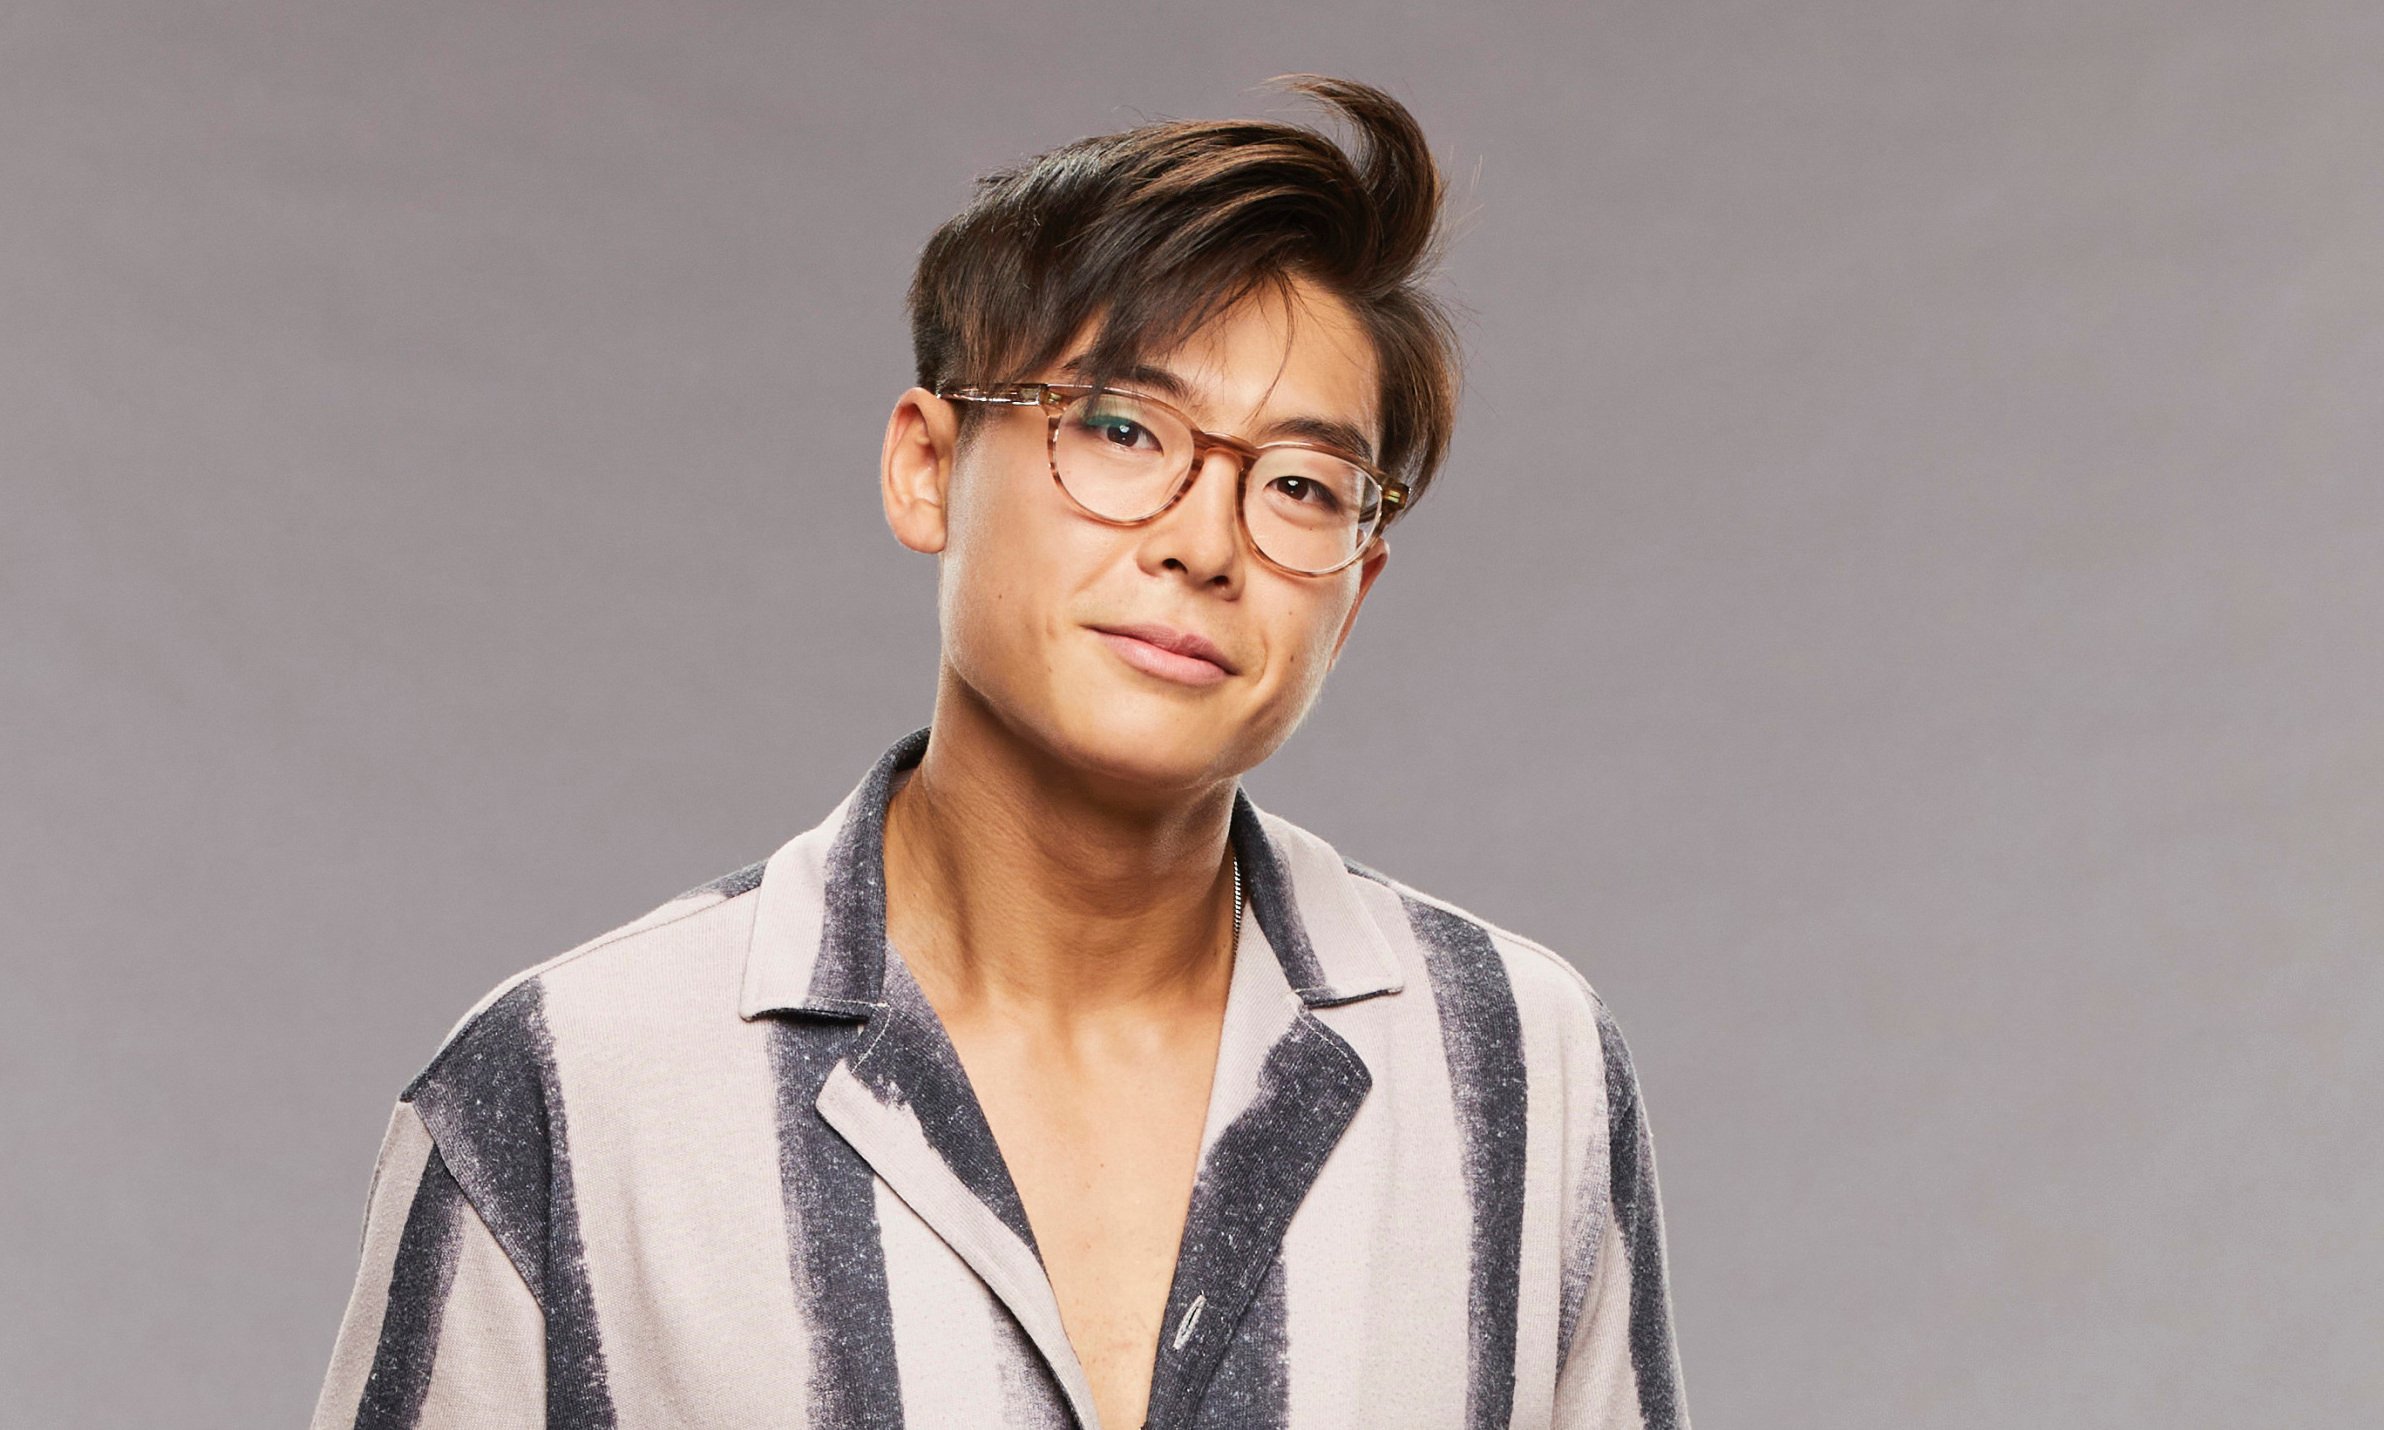 Derek Xiao of 'Big Brother 23' poses in a stripped shirt.